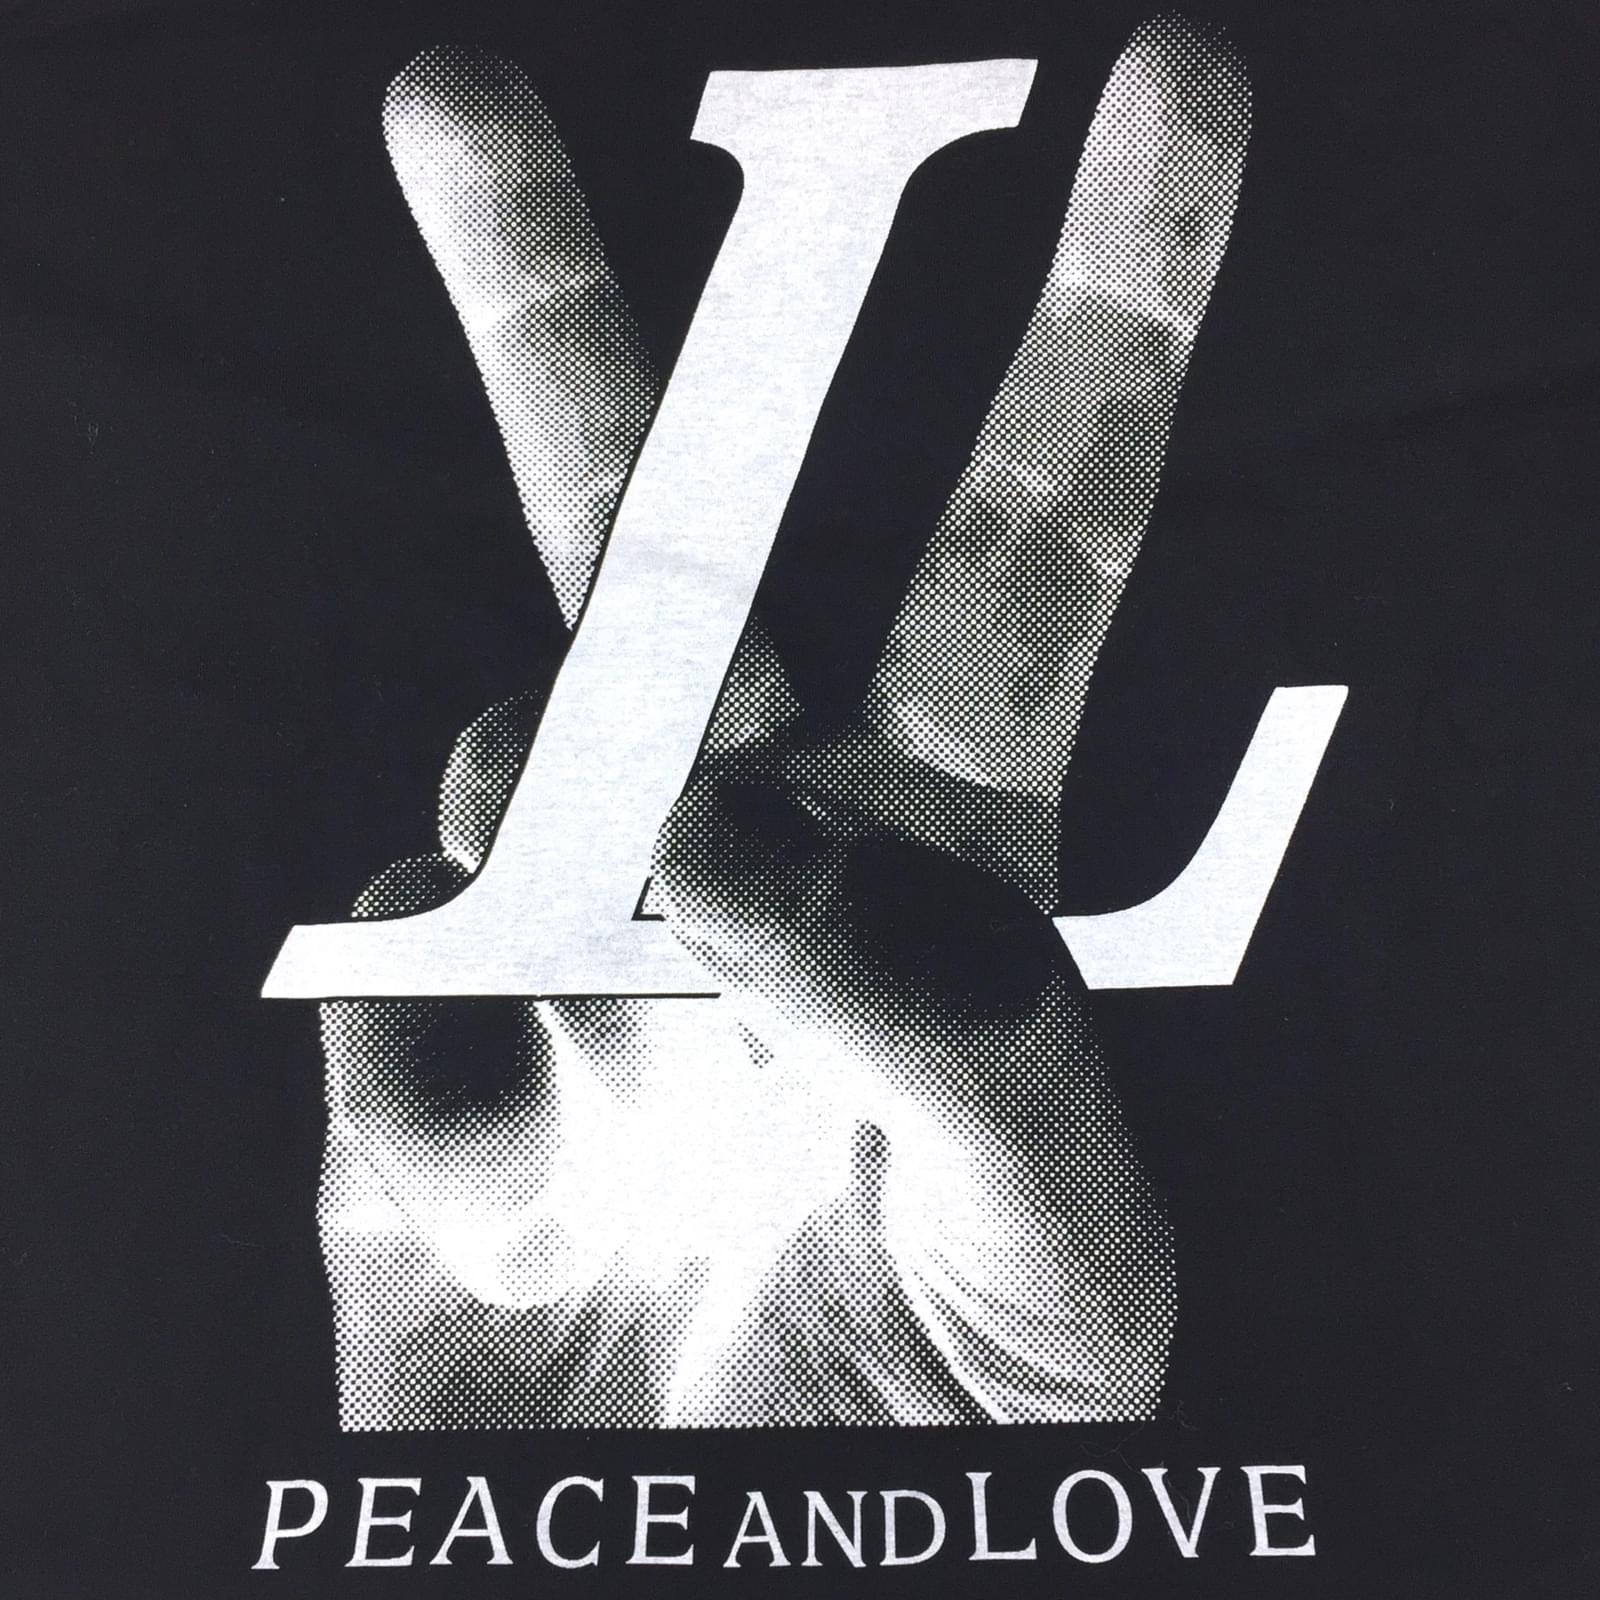 Mens large Louis Vuitton peace and love t shirt, No